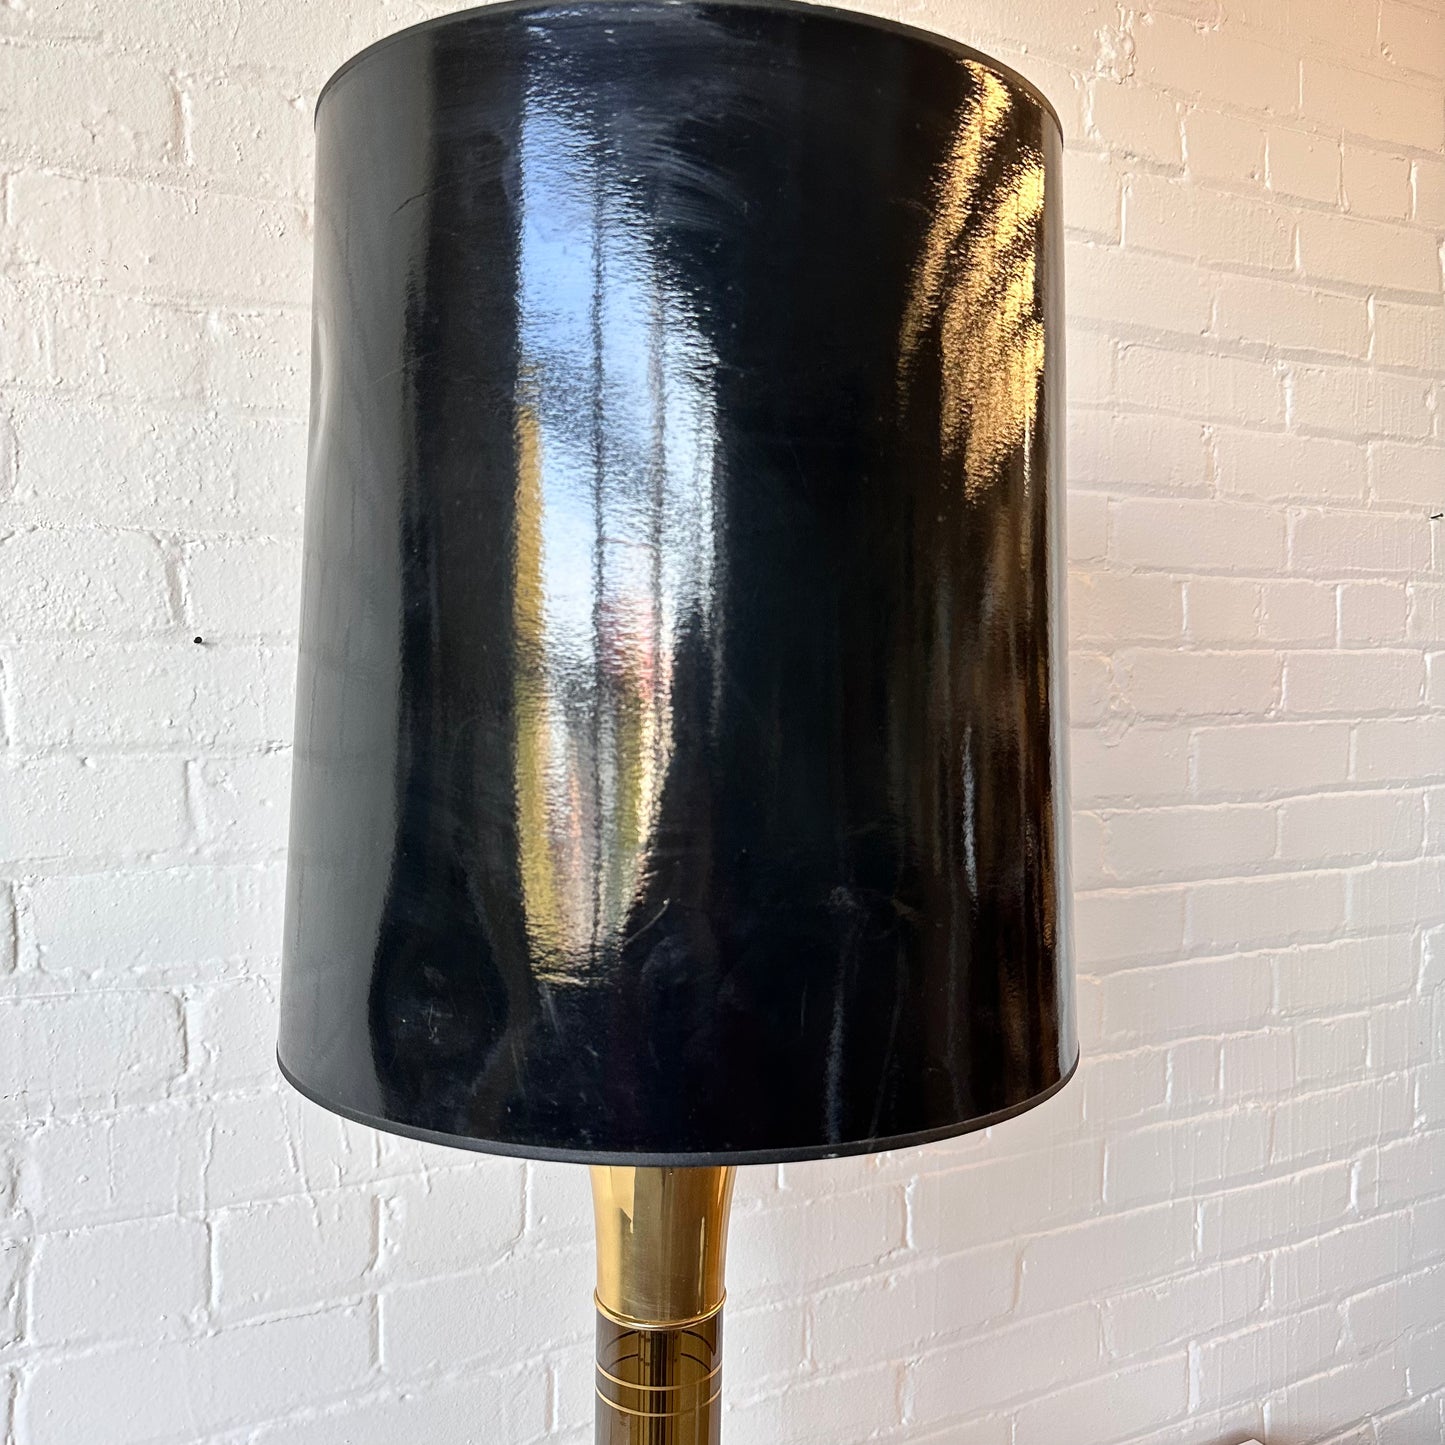 VINTAGE AMBER GLASS & BRASS TABLE LAMP WITH SHADE